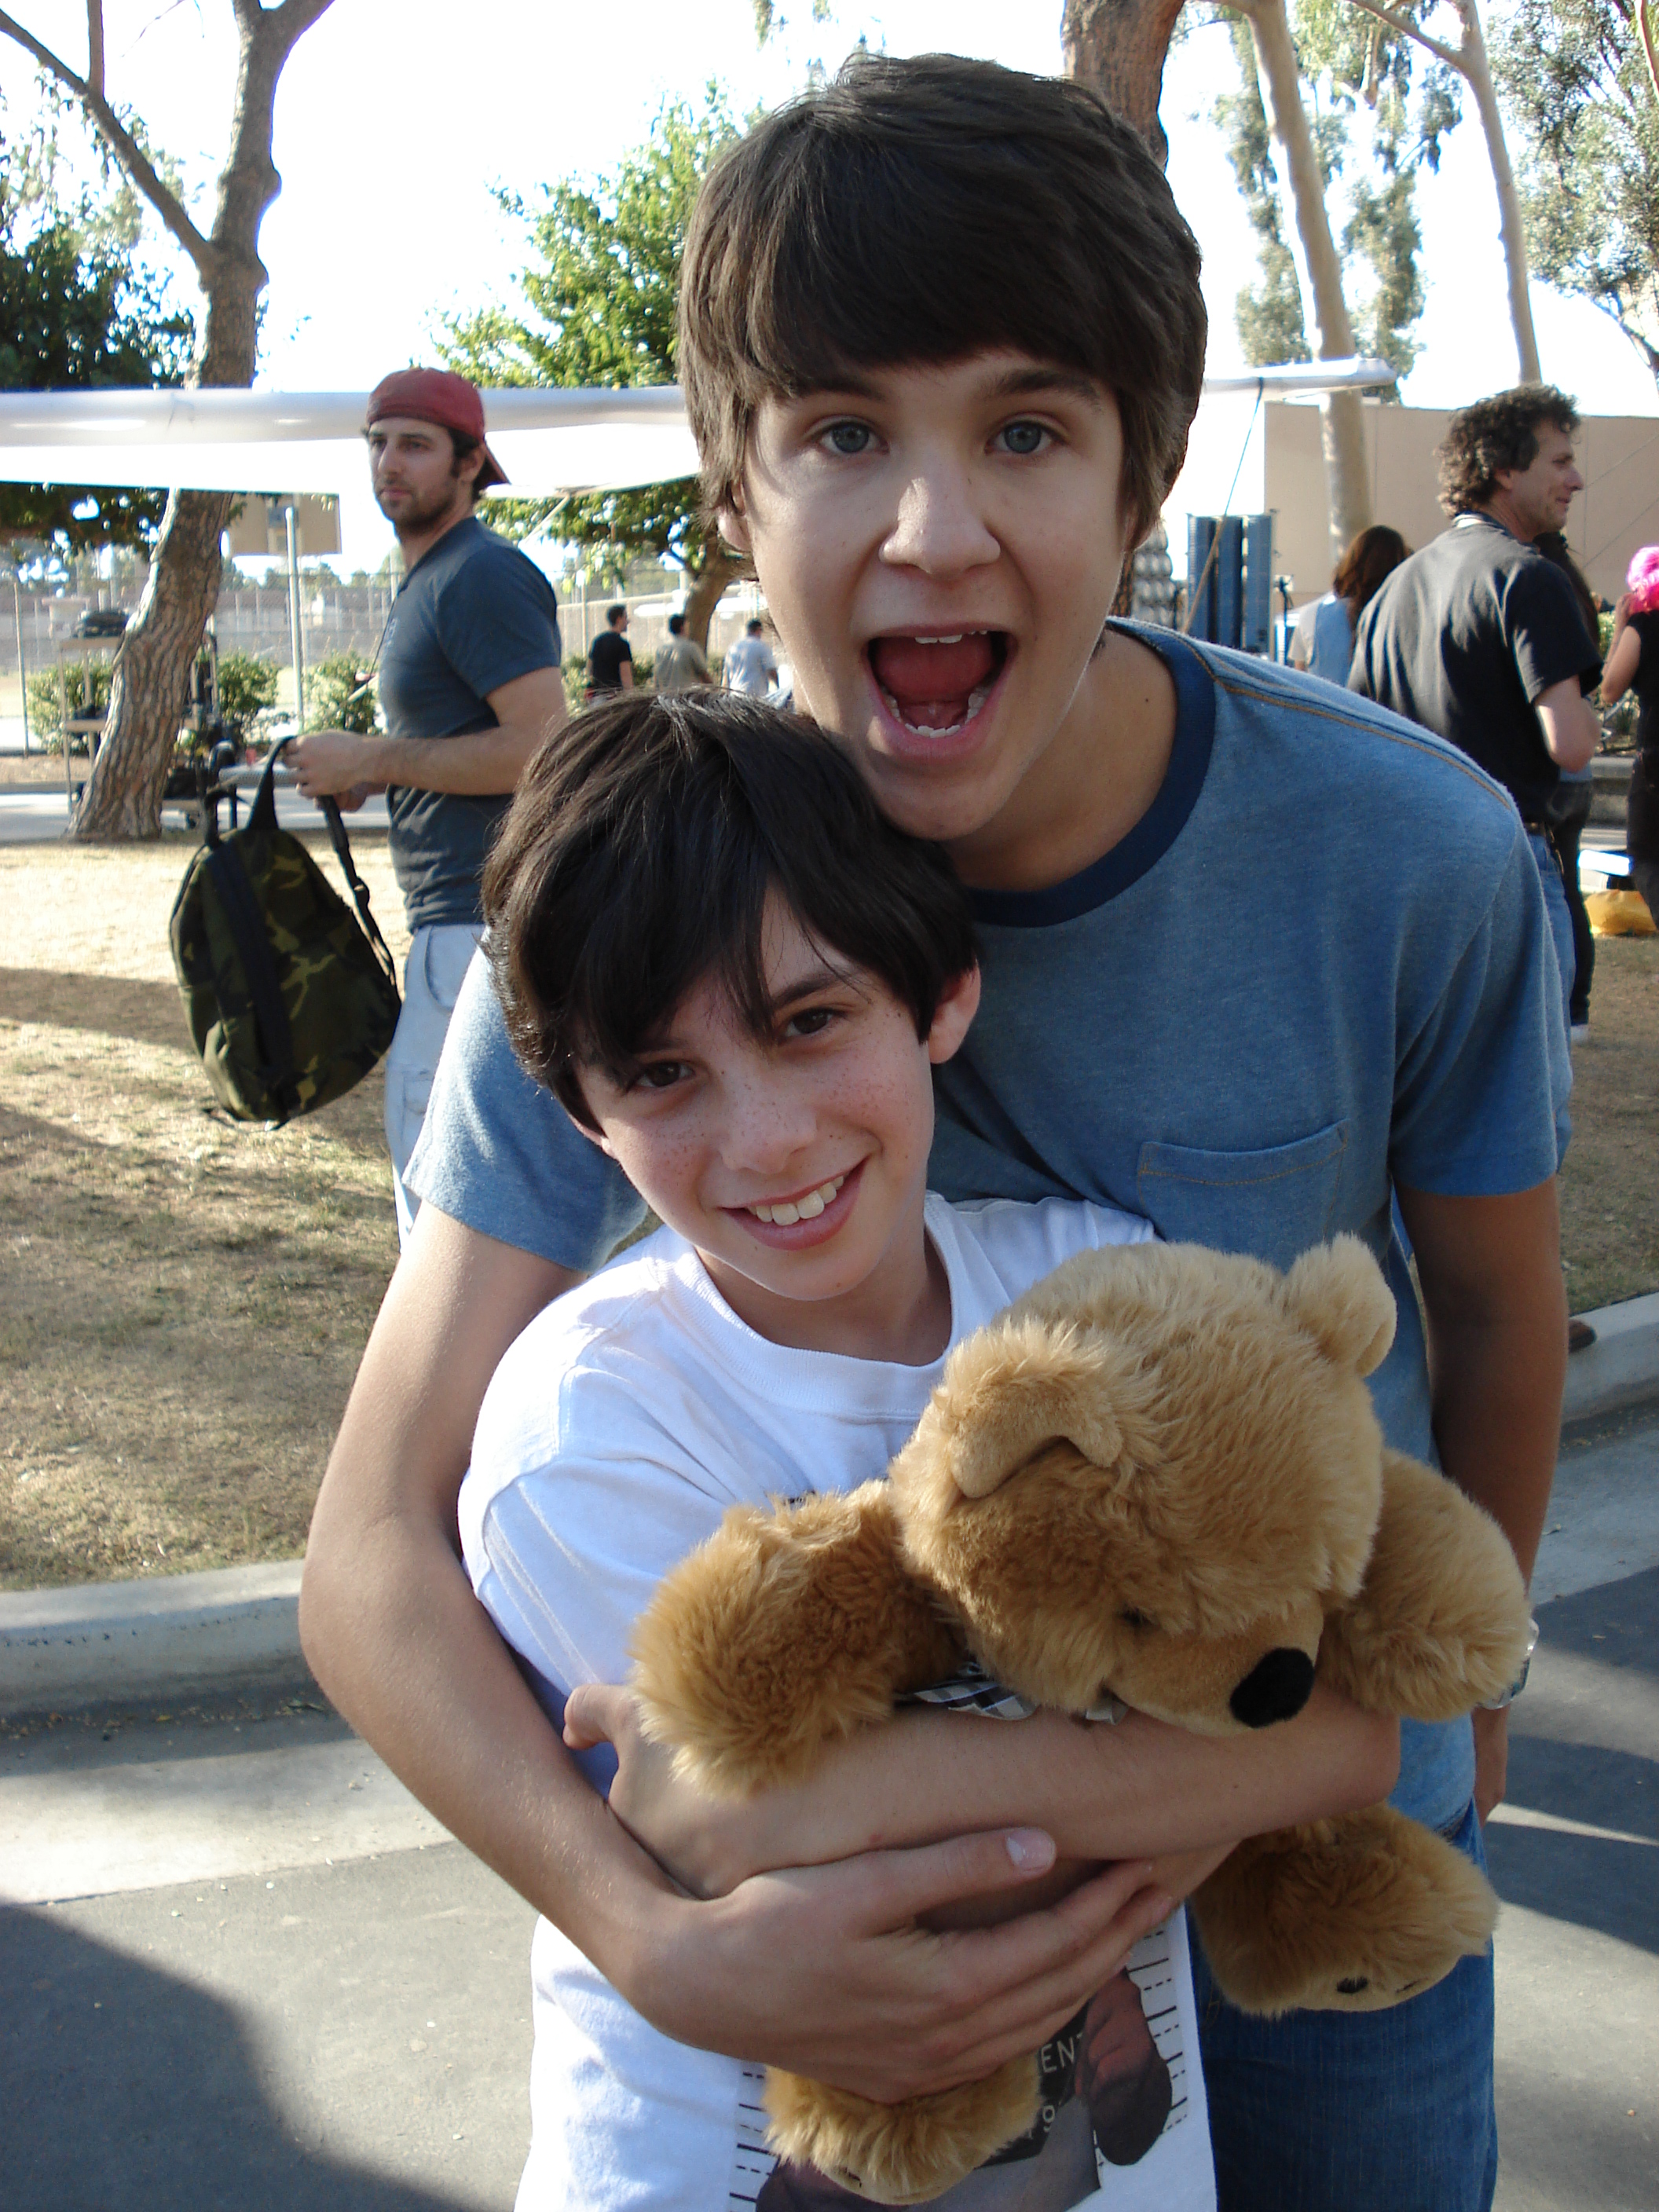 On the set of The First Time (Love at First Hiccup) with Devon Werkheiser